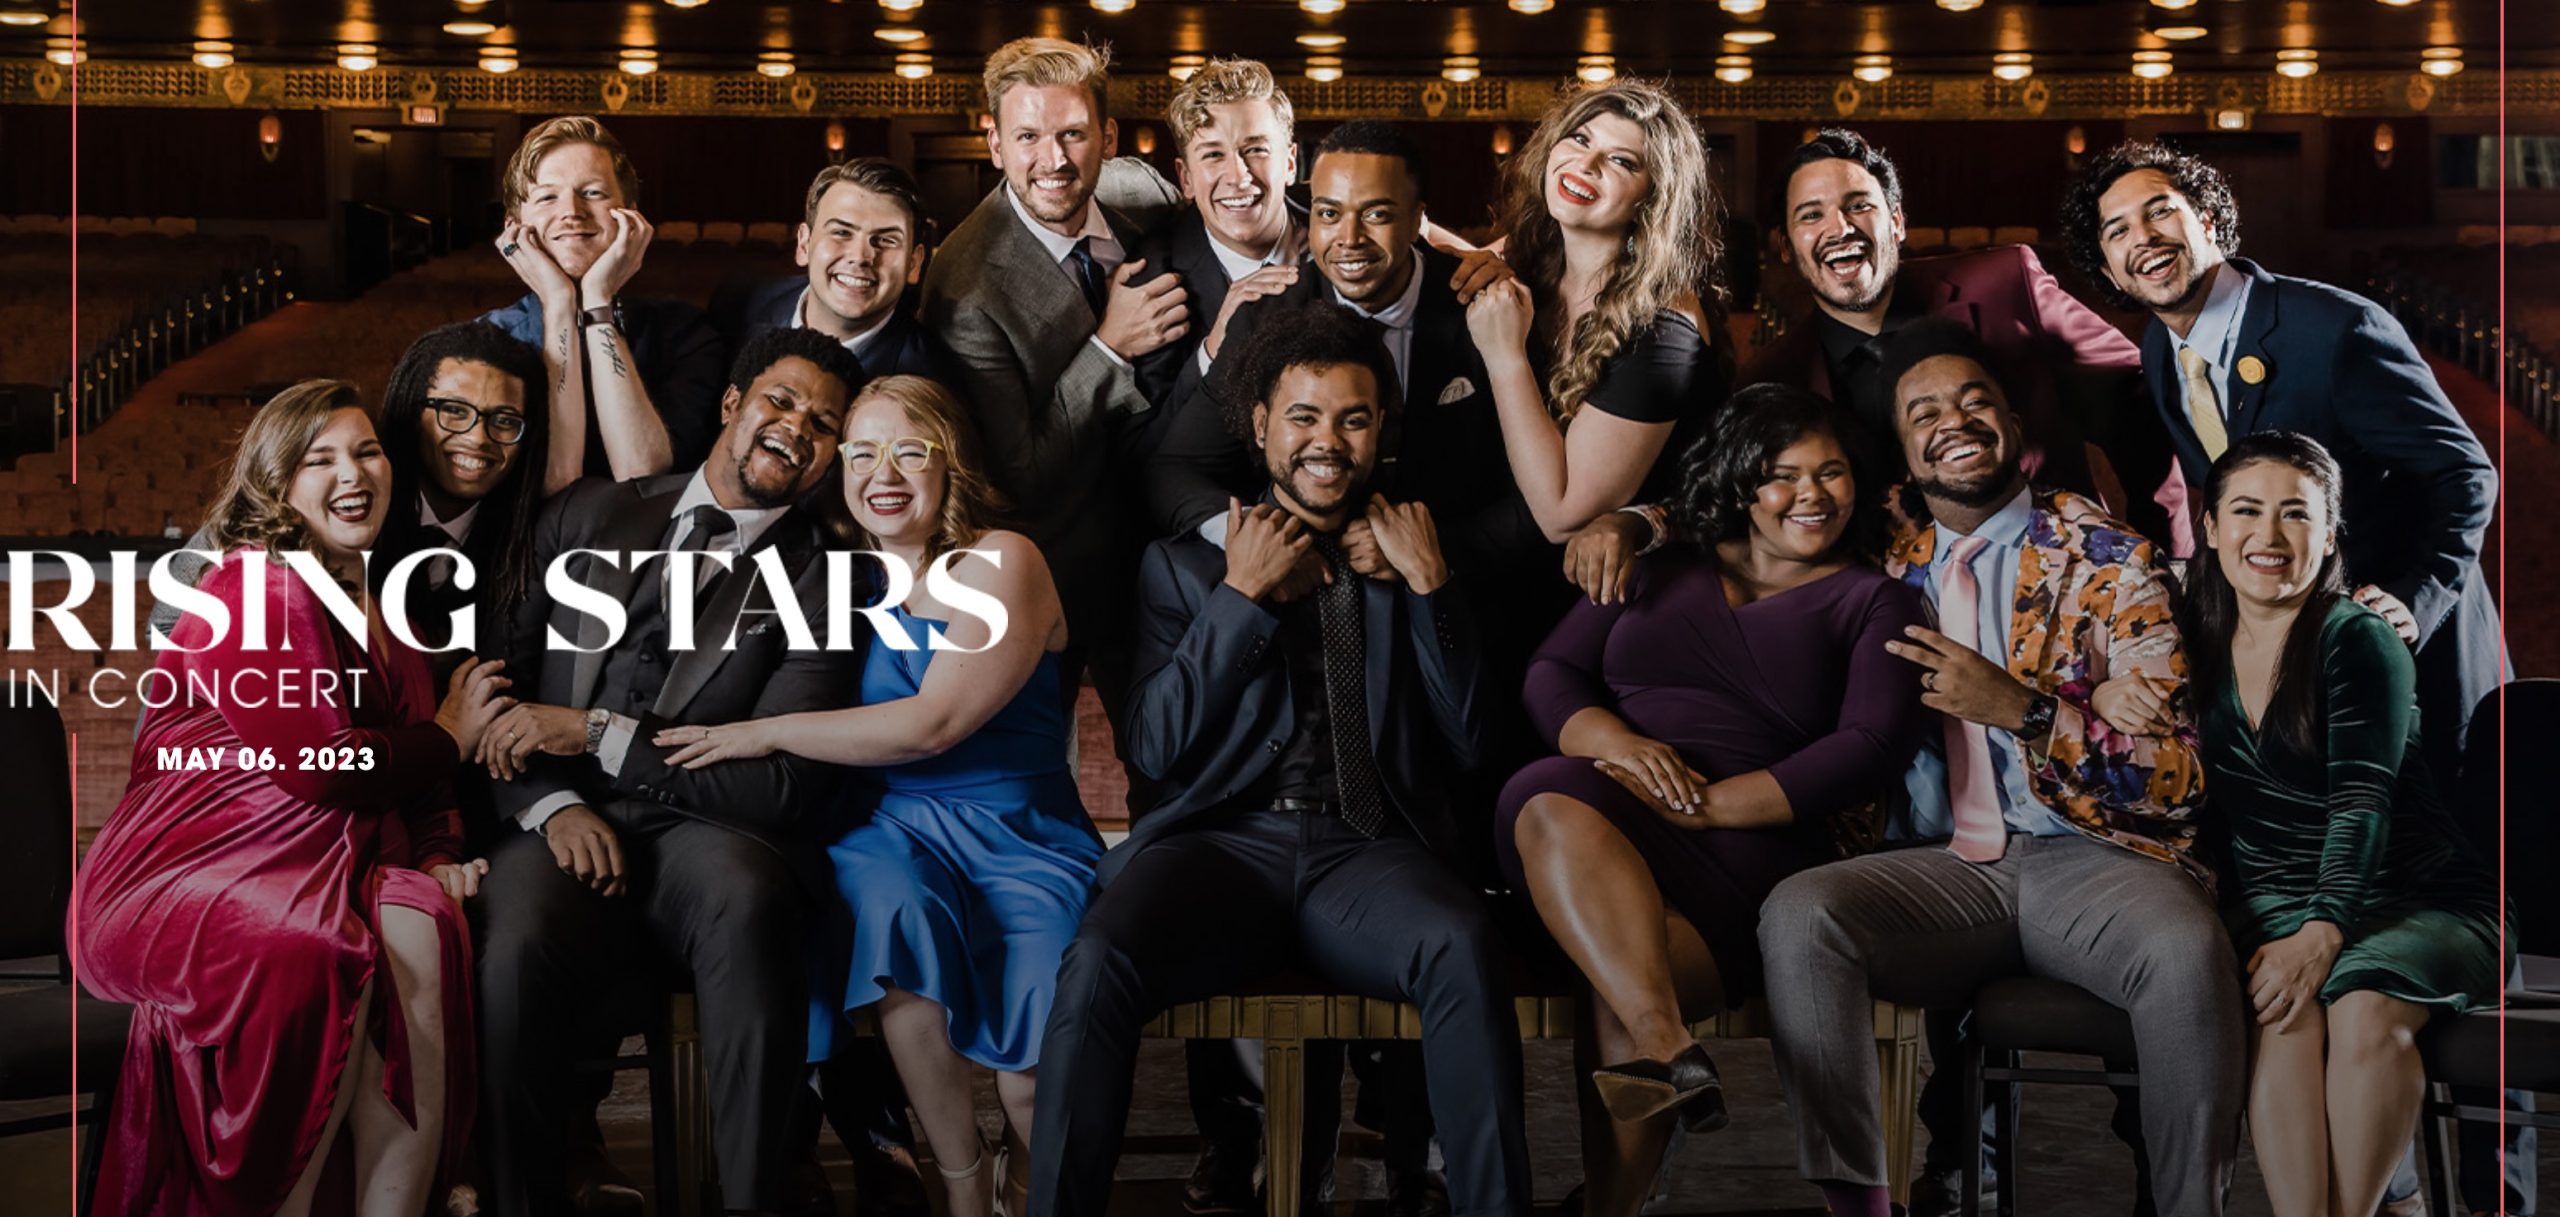 Lyric Opera’s Annual Rising Stars In Concert Returns Next Month To The Downtown Opera House